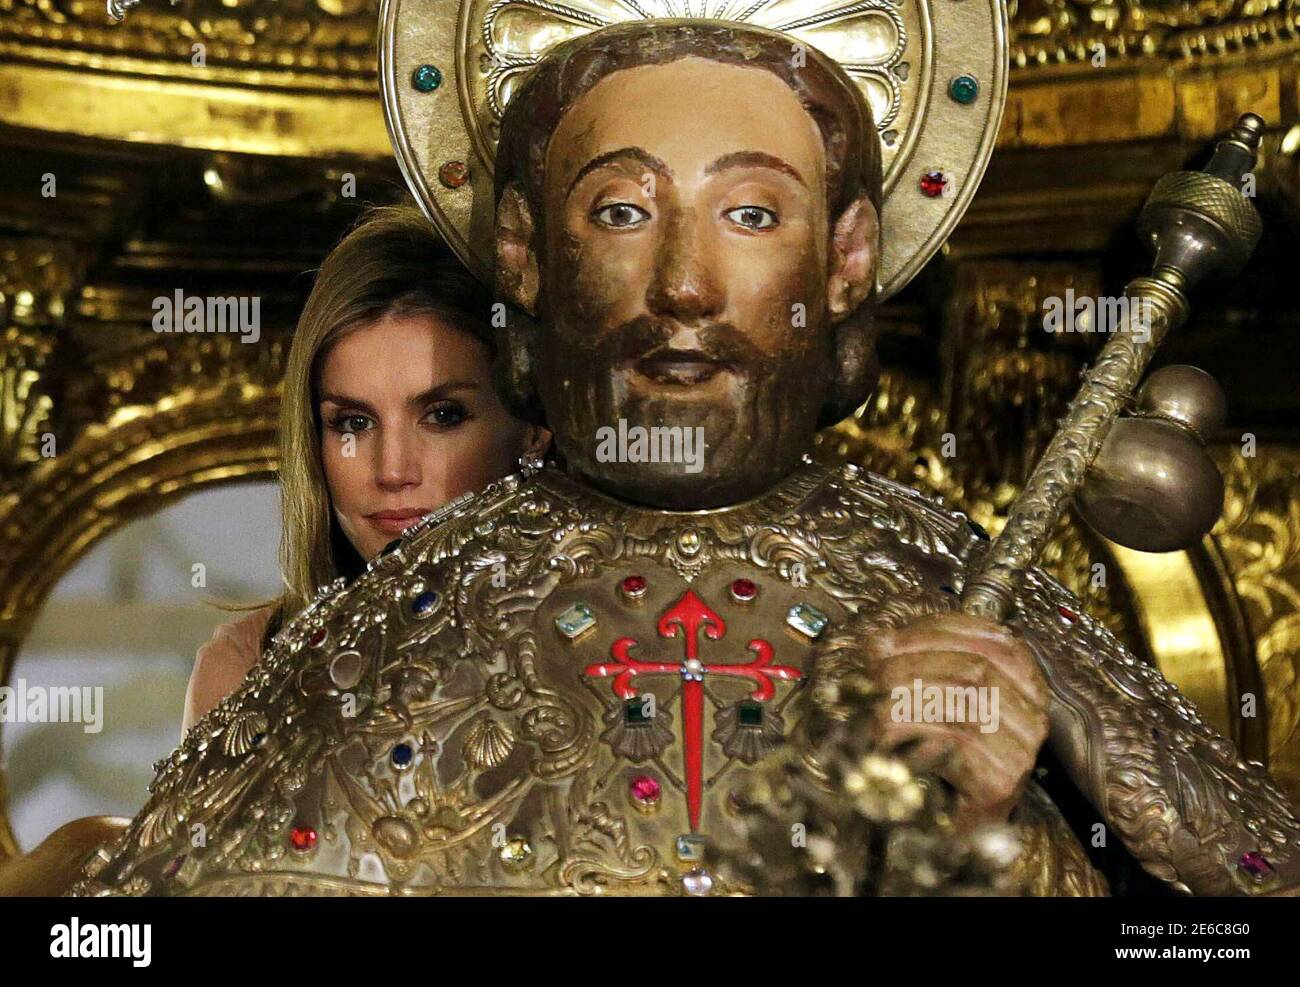 spains-queen-letizia-embraces-the-figure-of-st-james-as-is-traditional-on-the-saints-feast-day-inside-the-cathedral-in-santiago-de-compostela-july-25-2014-reuters-lavandeira-jr-pool-spain-tags-royals-religion-2e6c8g0.jpg